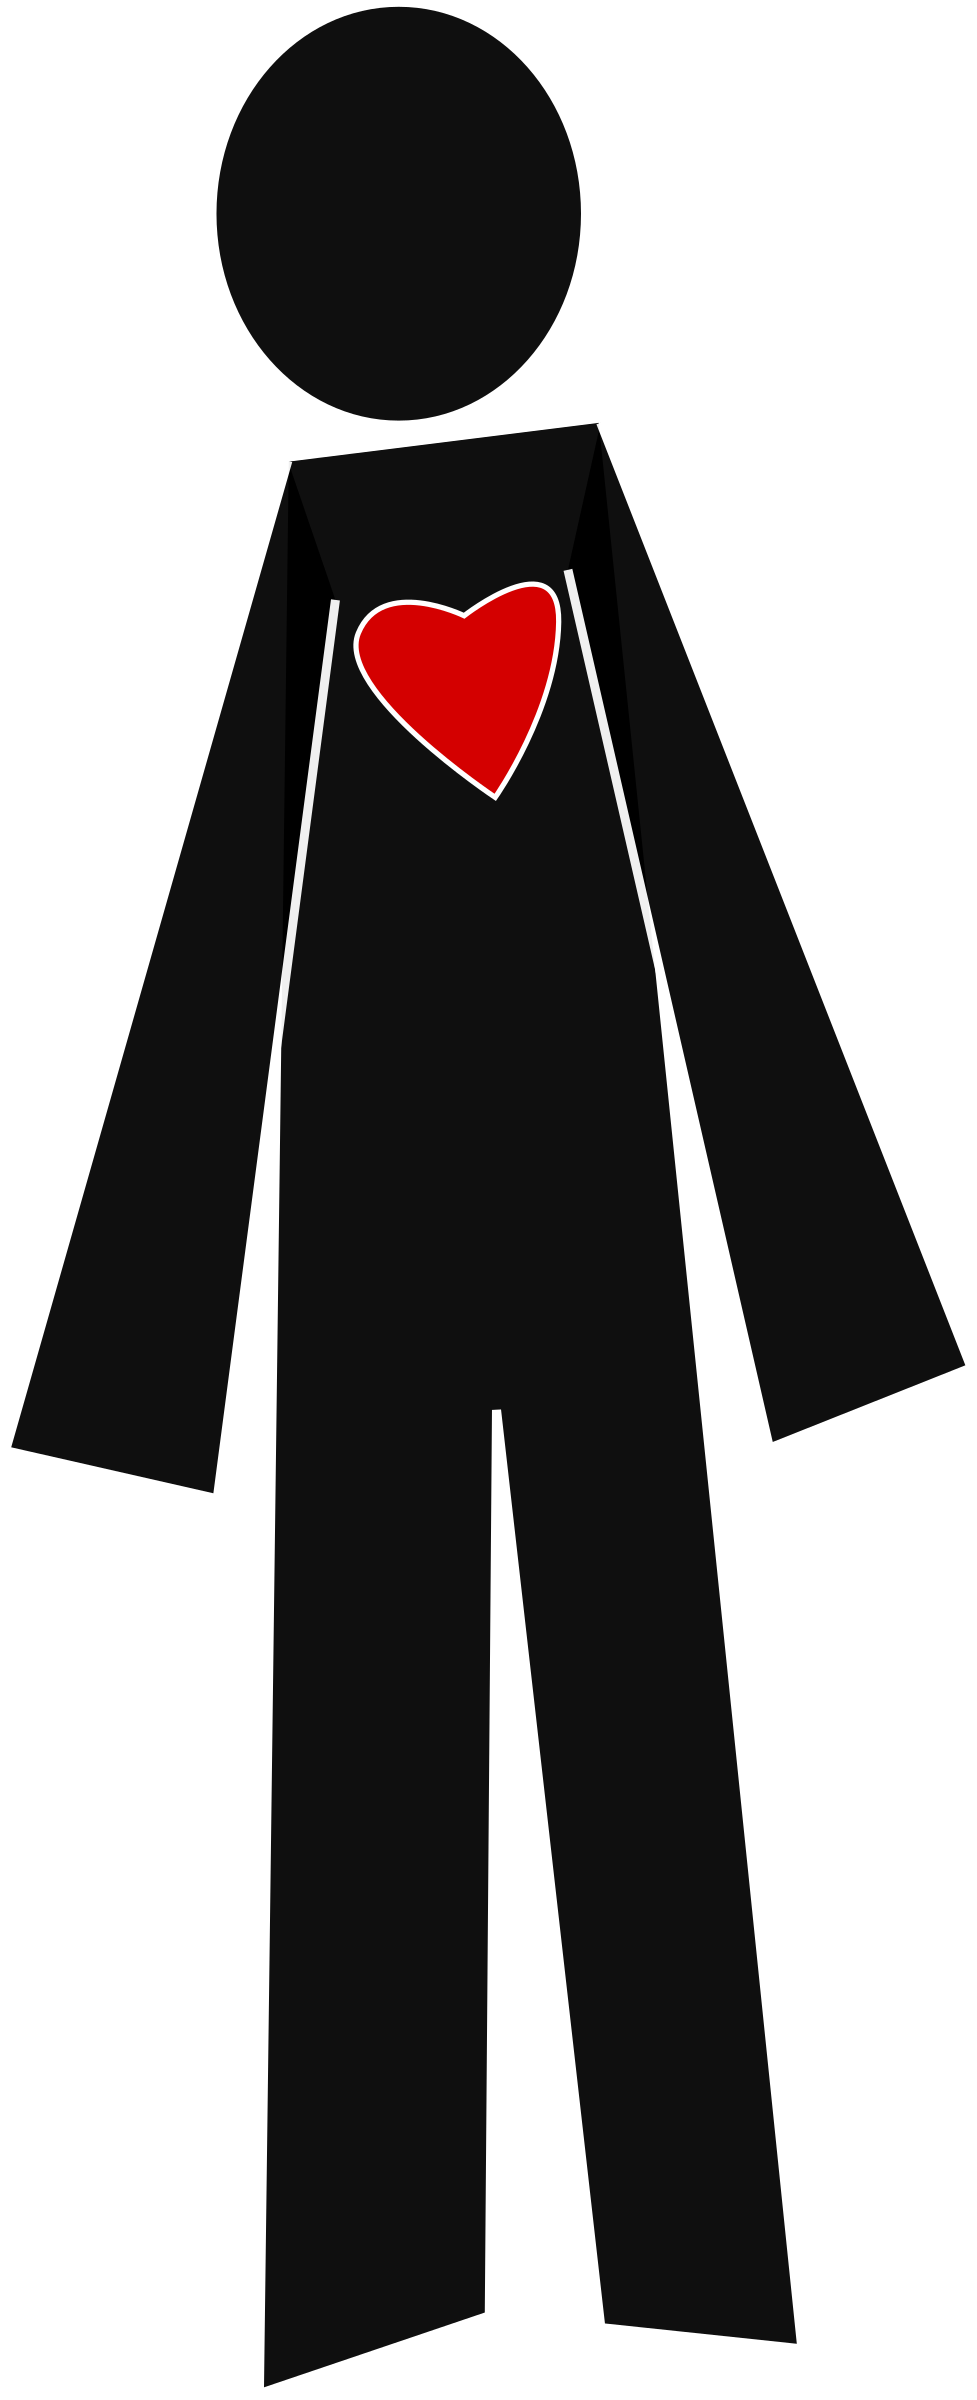 clipart images person